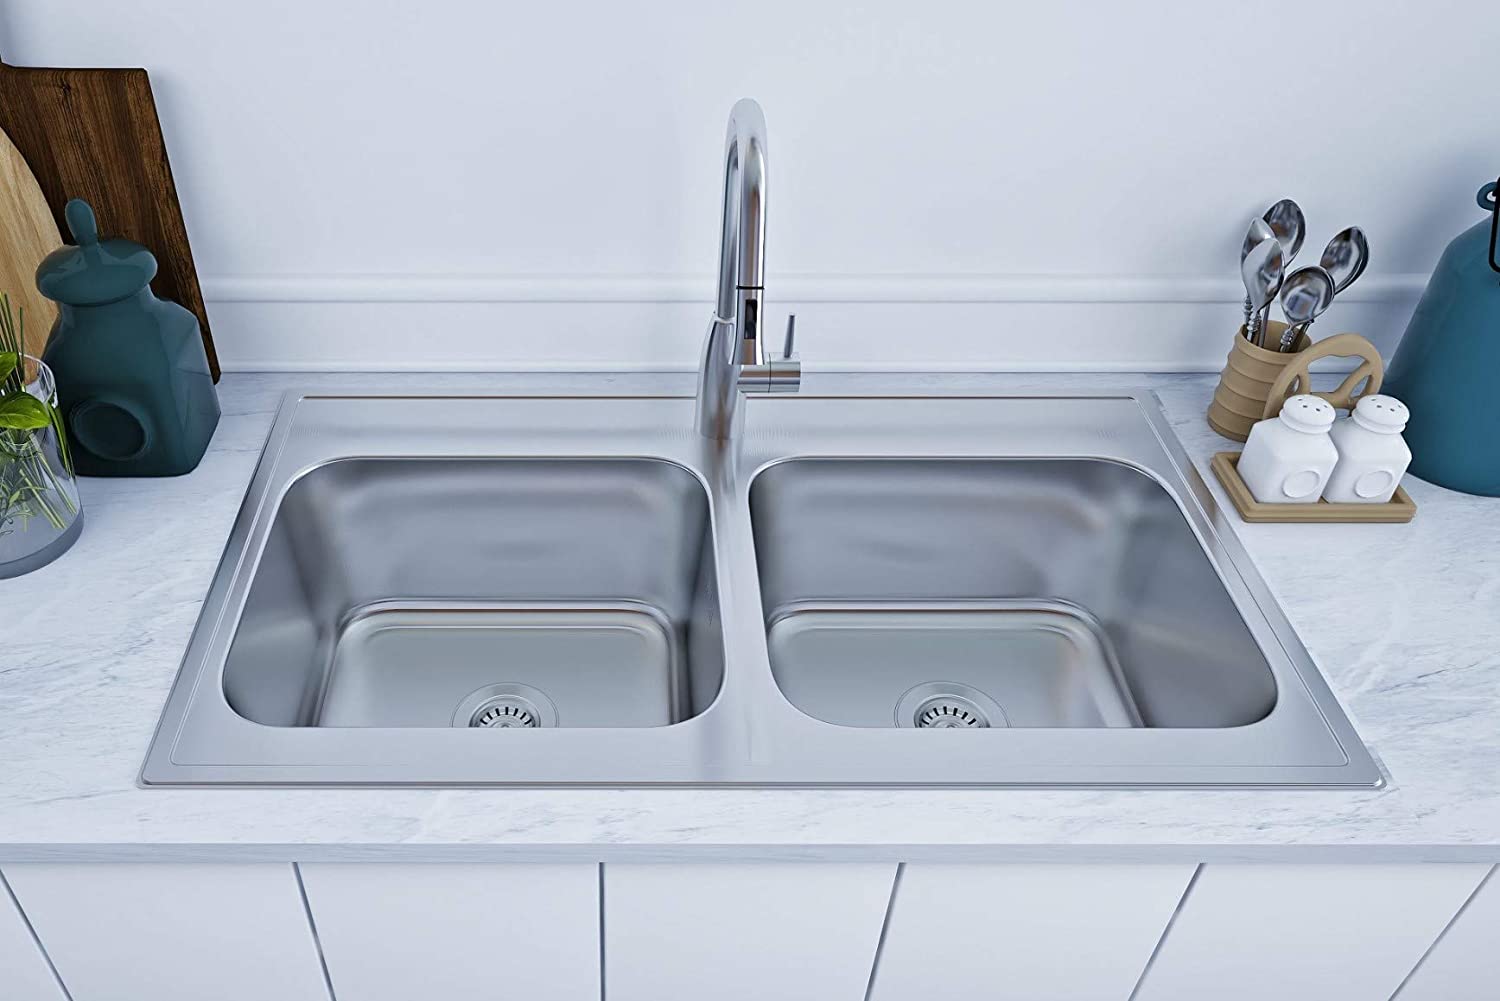 33x19 kitchen sink for mobile home